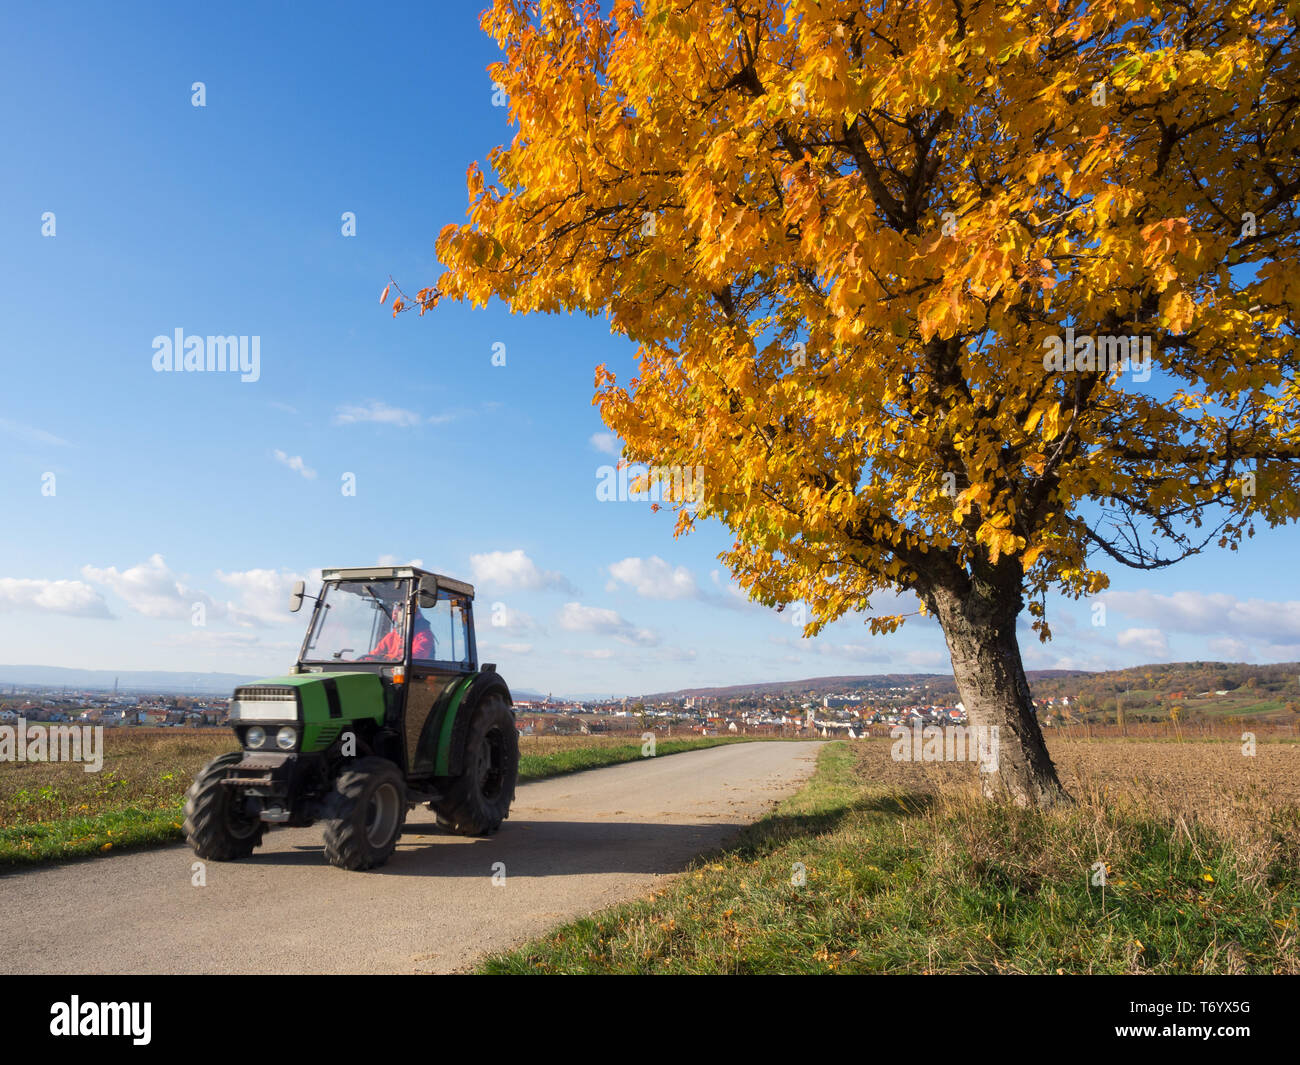 Rural scene with tractor Stock Photo